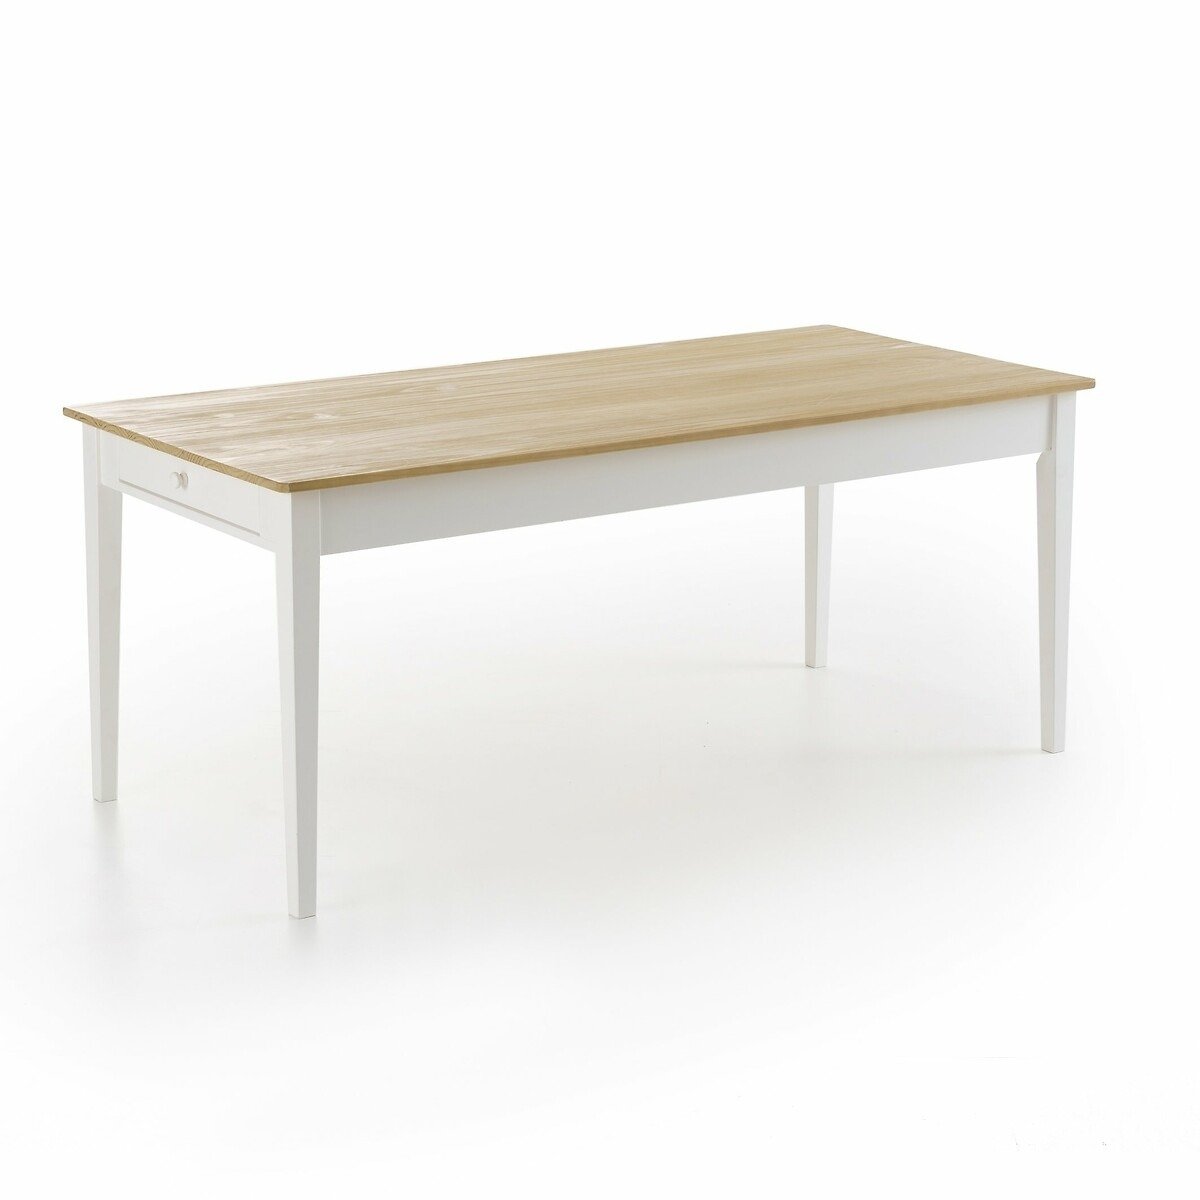 Alvina Solid Pine Dining Table (Seats 6-8) - image 1